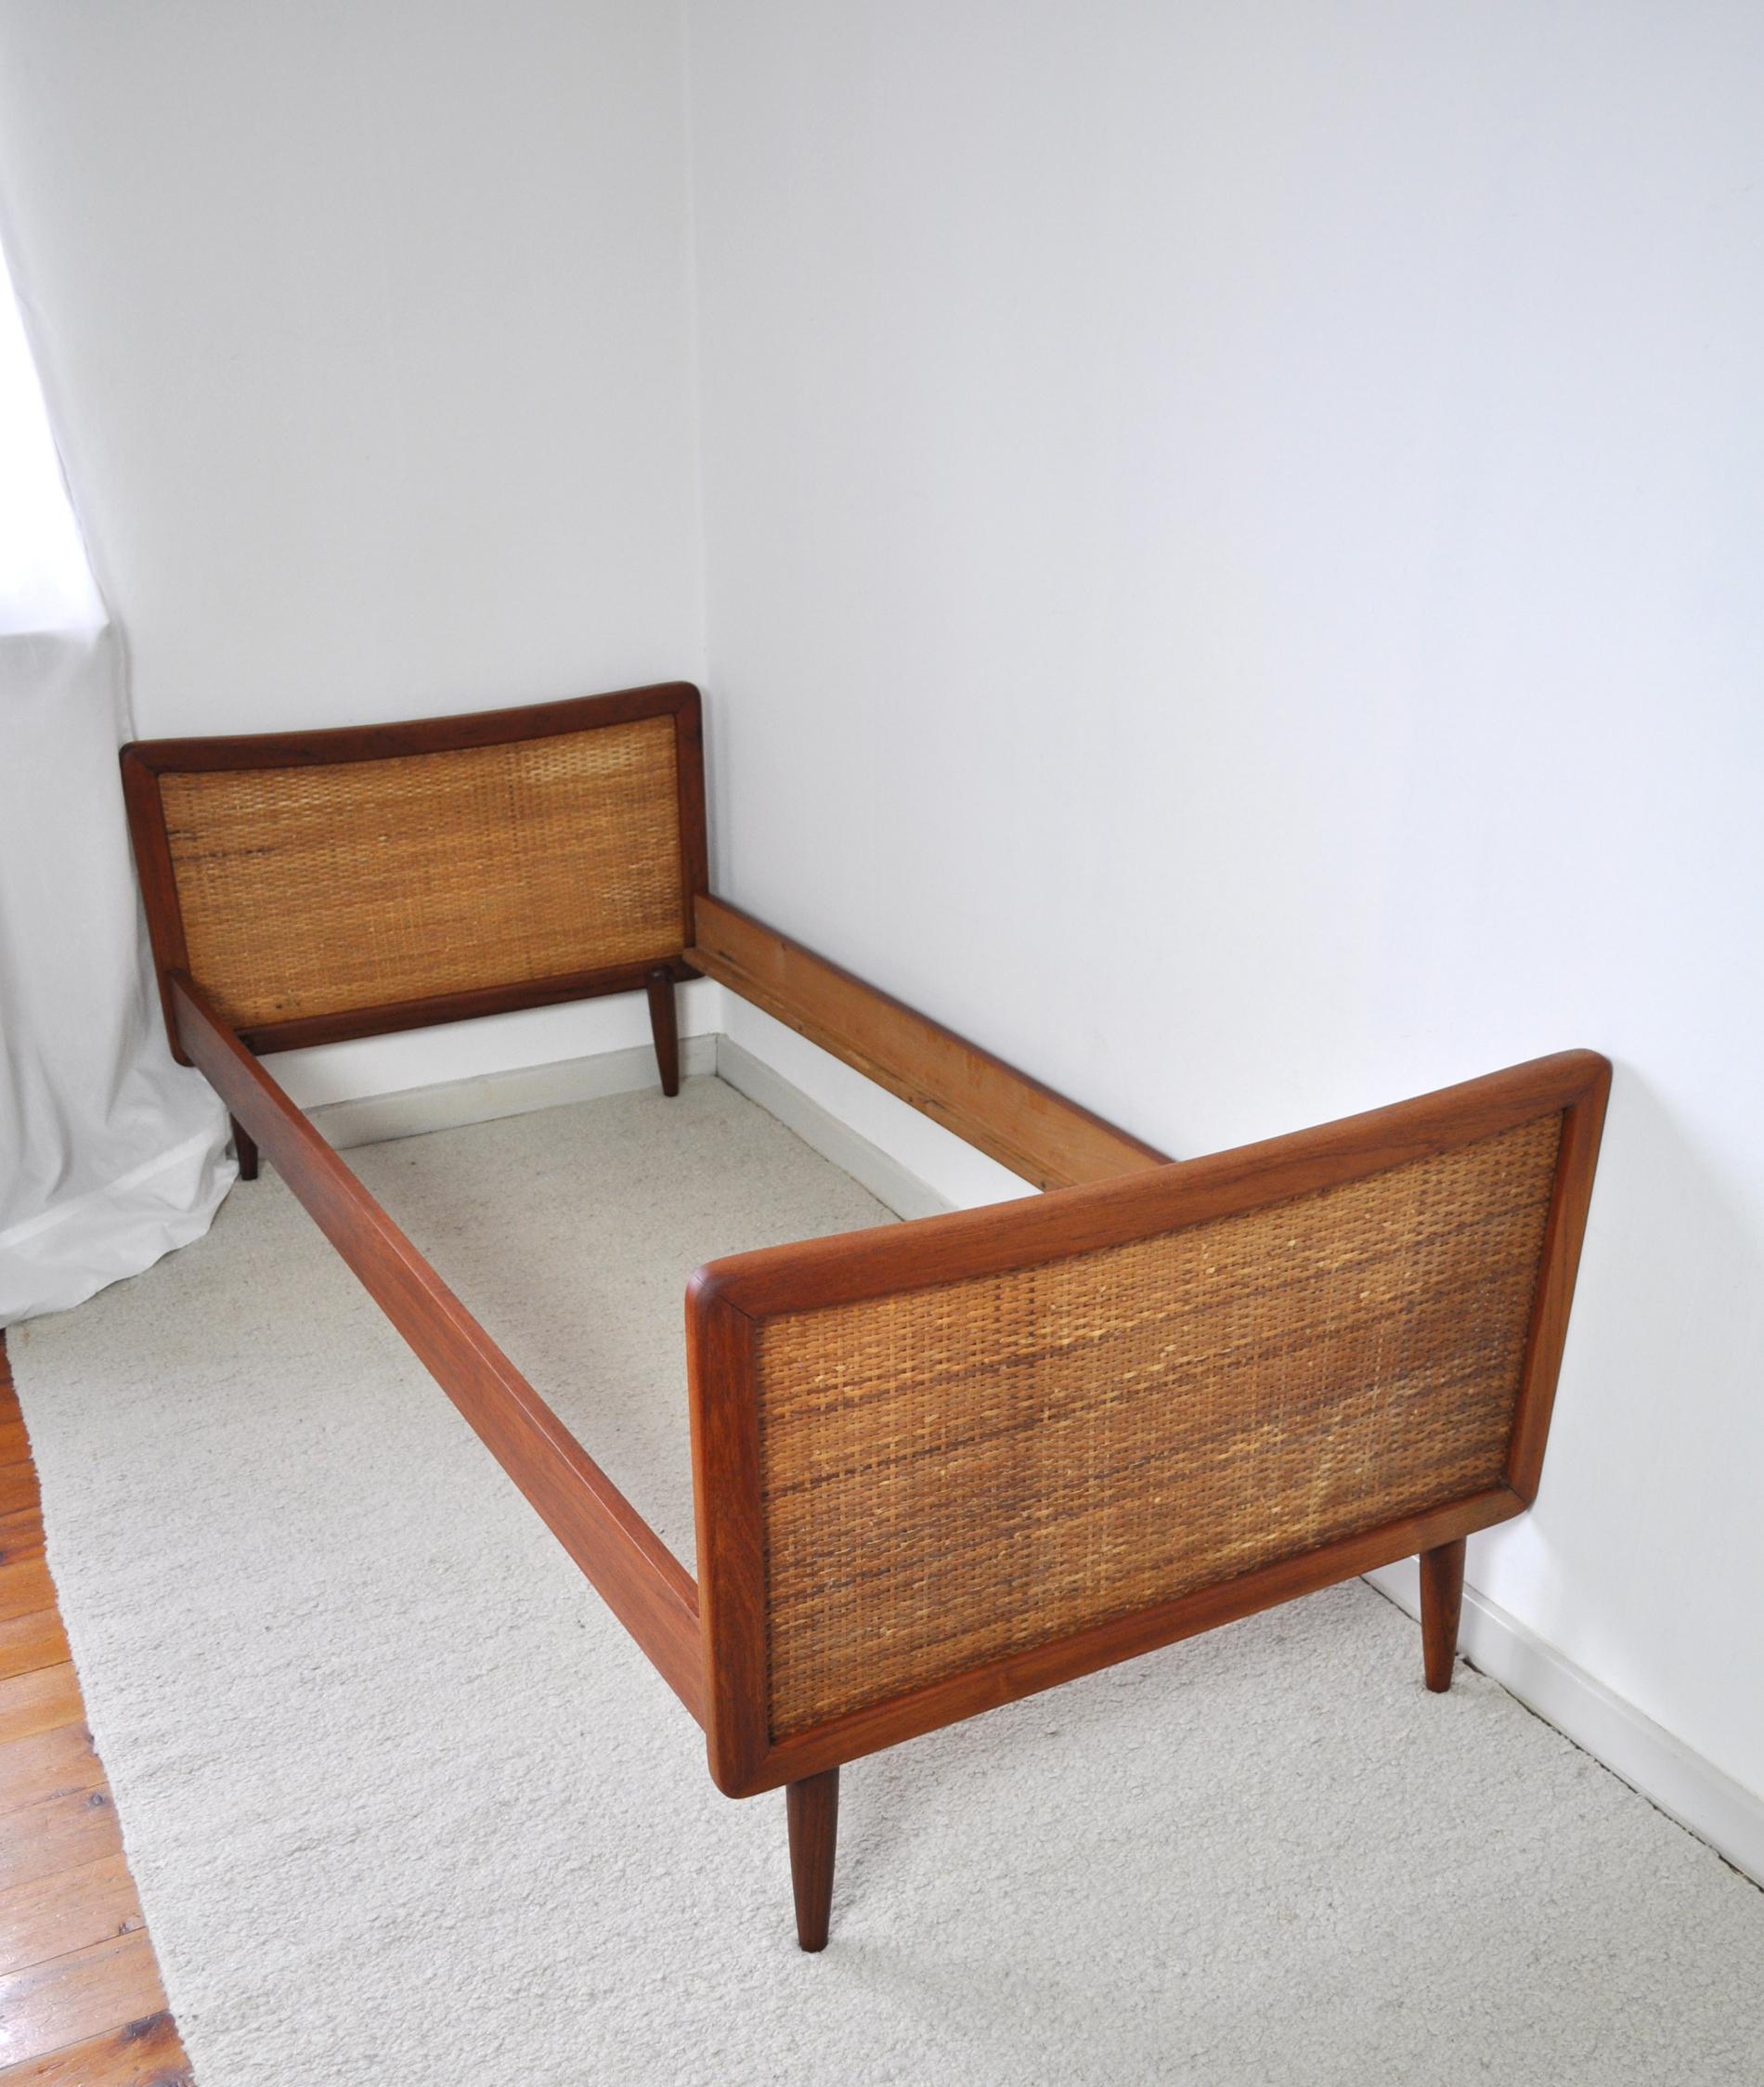 20th Century Scandinavian Modern Teak Bed with Woven Cane Head and Footboard